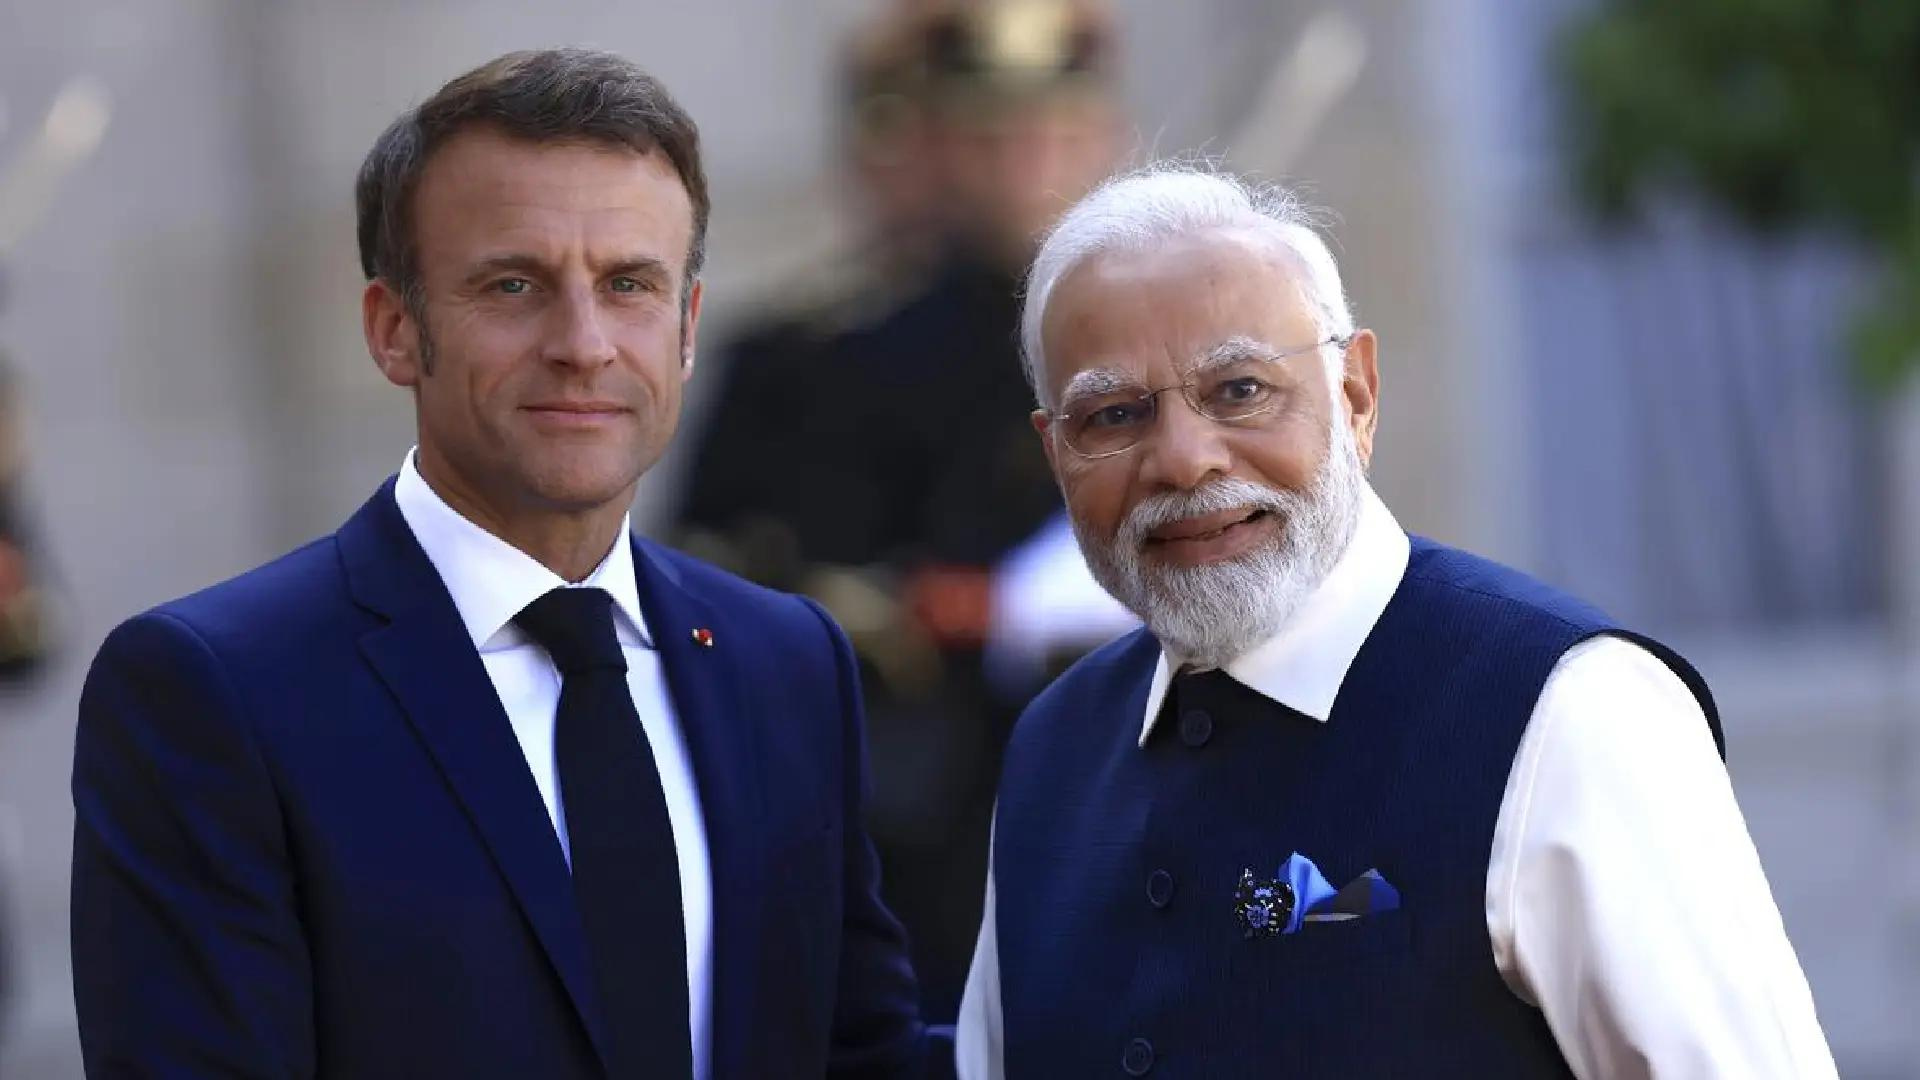 French President Macron is scheduled to visit Jaipur, will tour pink city with PM Modi